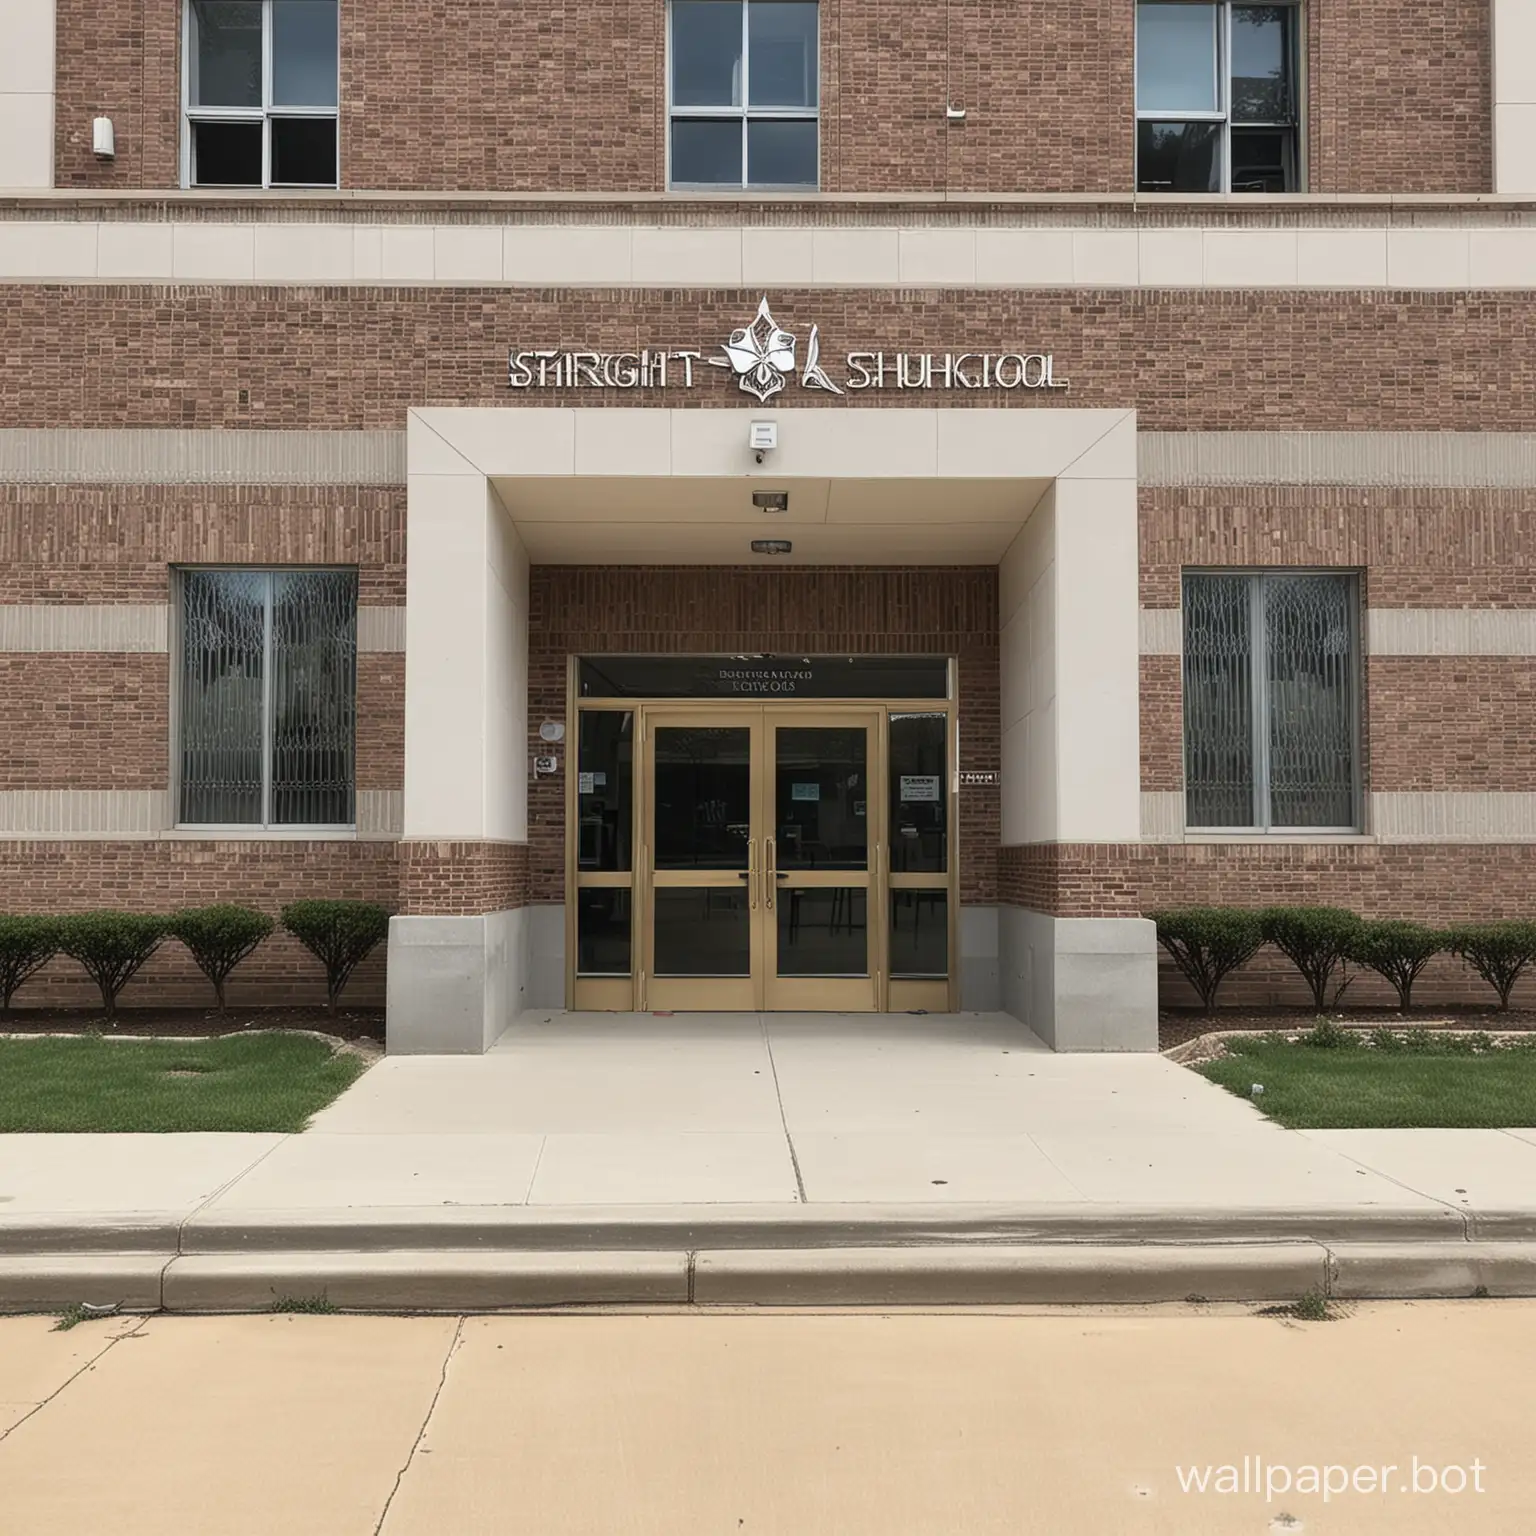 In front of the teaching building named Starlight School, the weather is required to be good, and the entrance and entire front of the teaching building must be visible. The teaching building should be at least 6 floors.